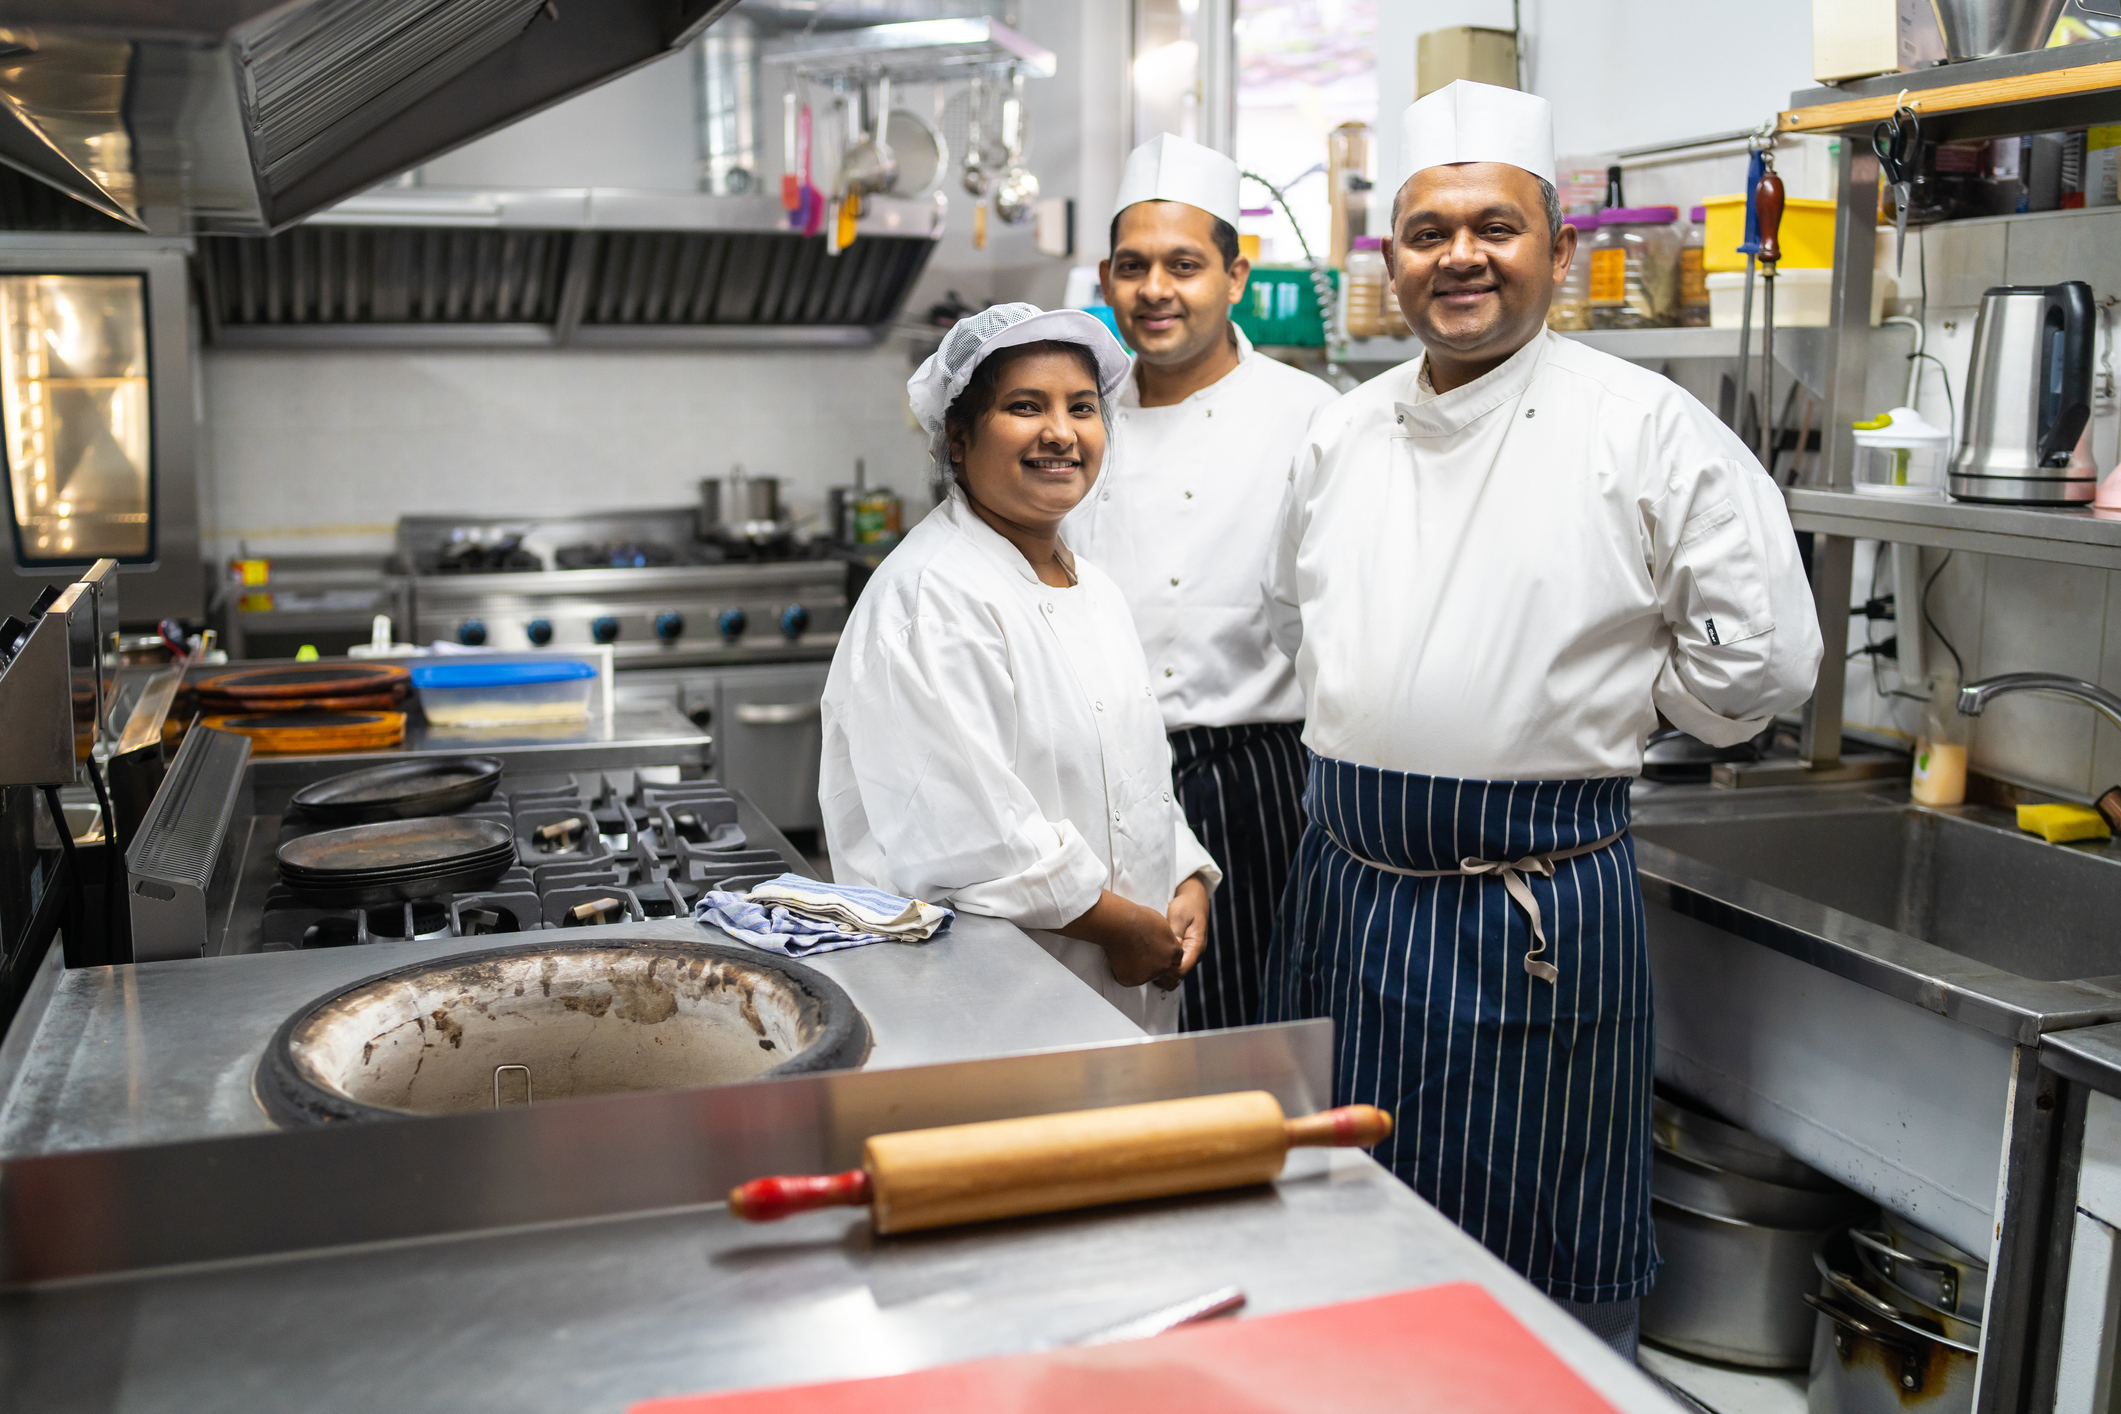 A group of chefs in an industrial kitchen